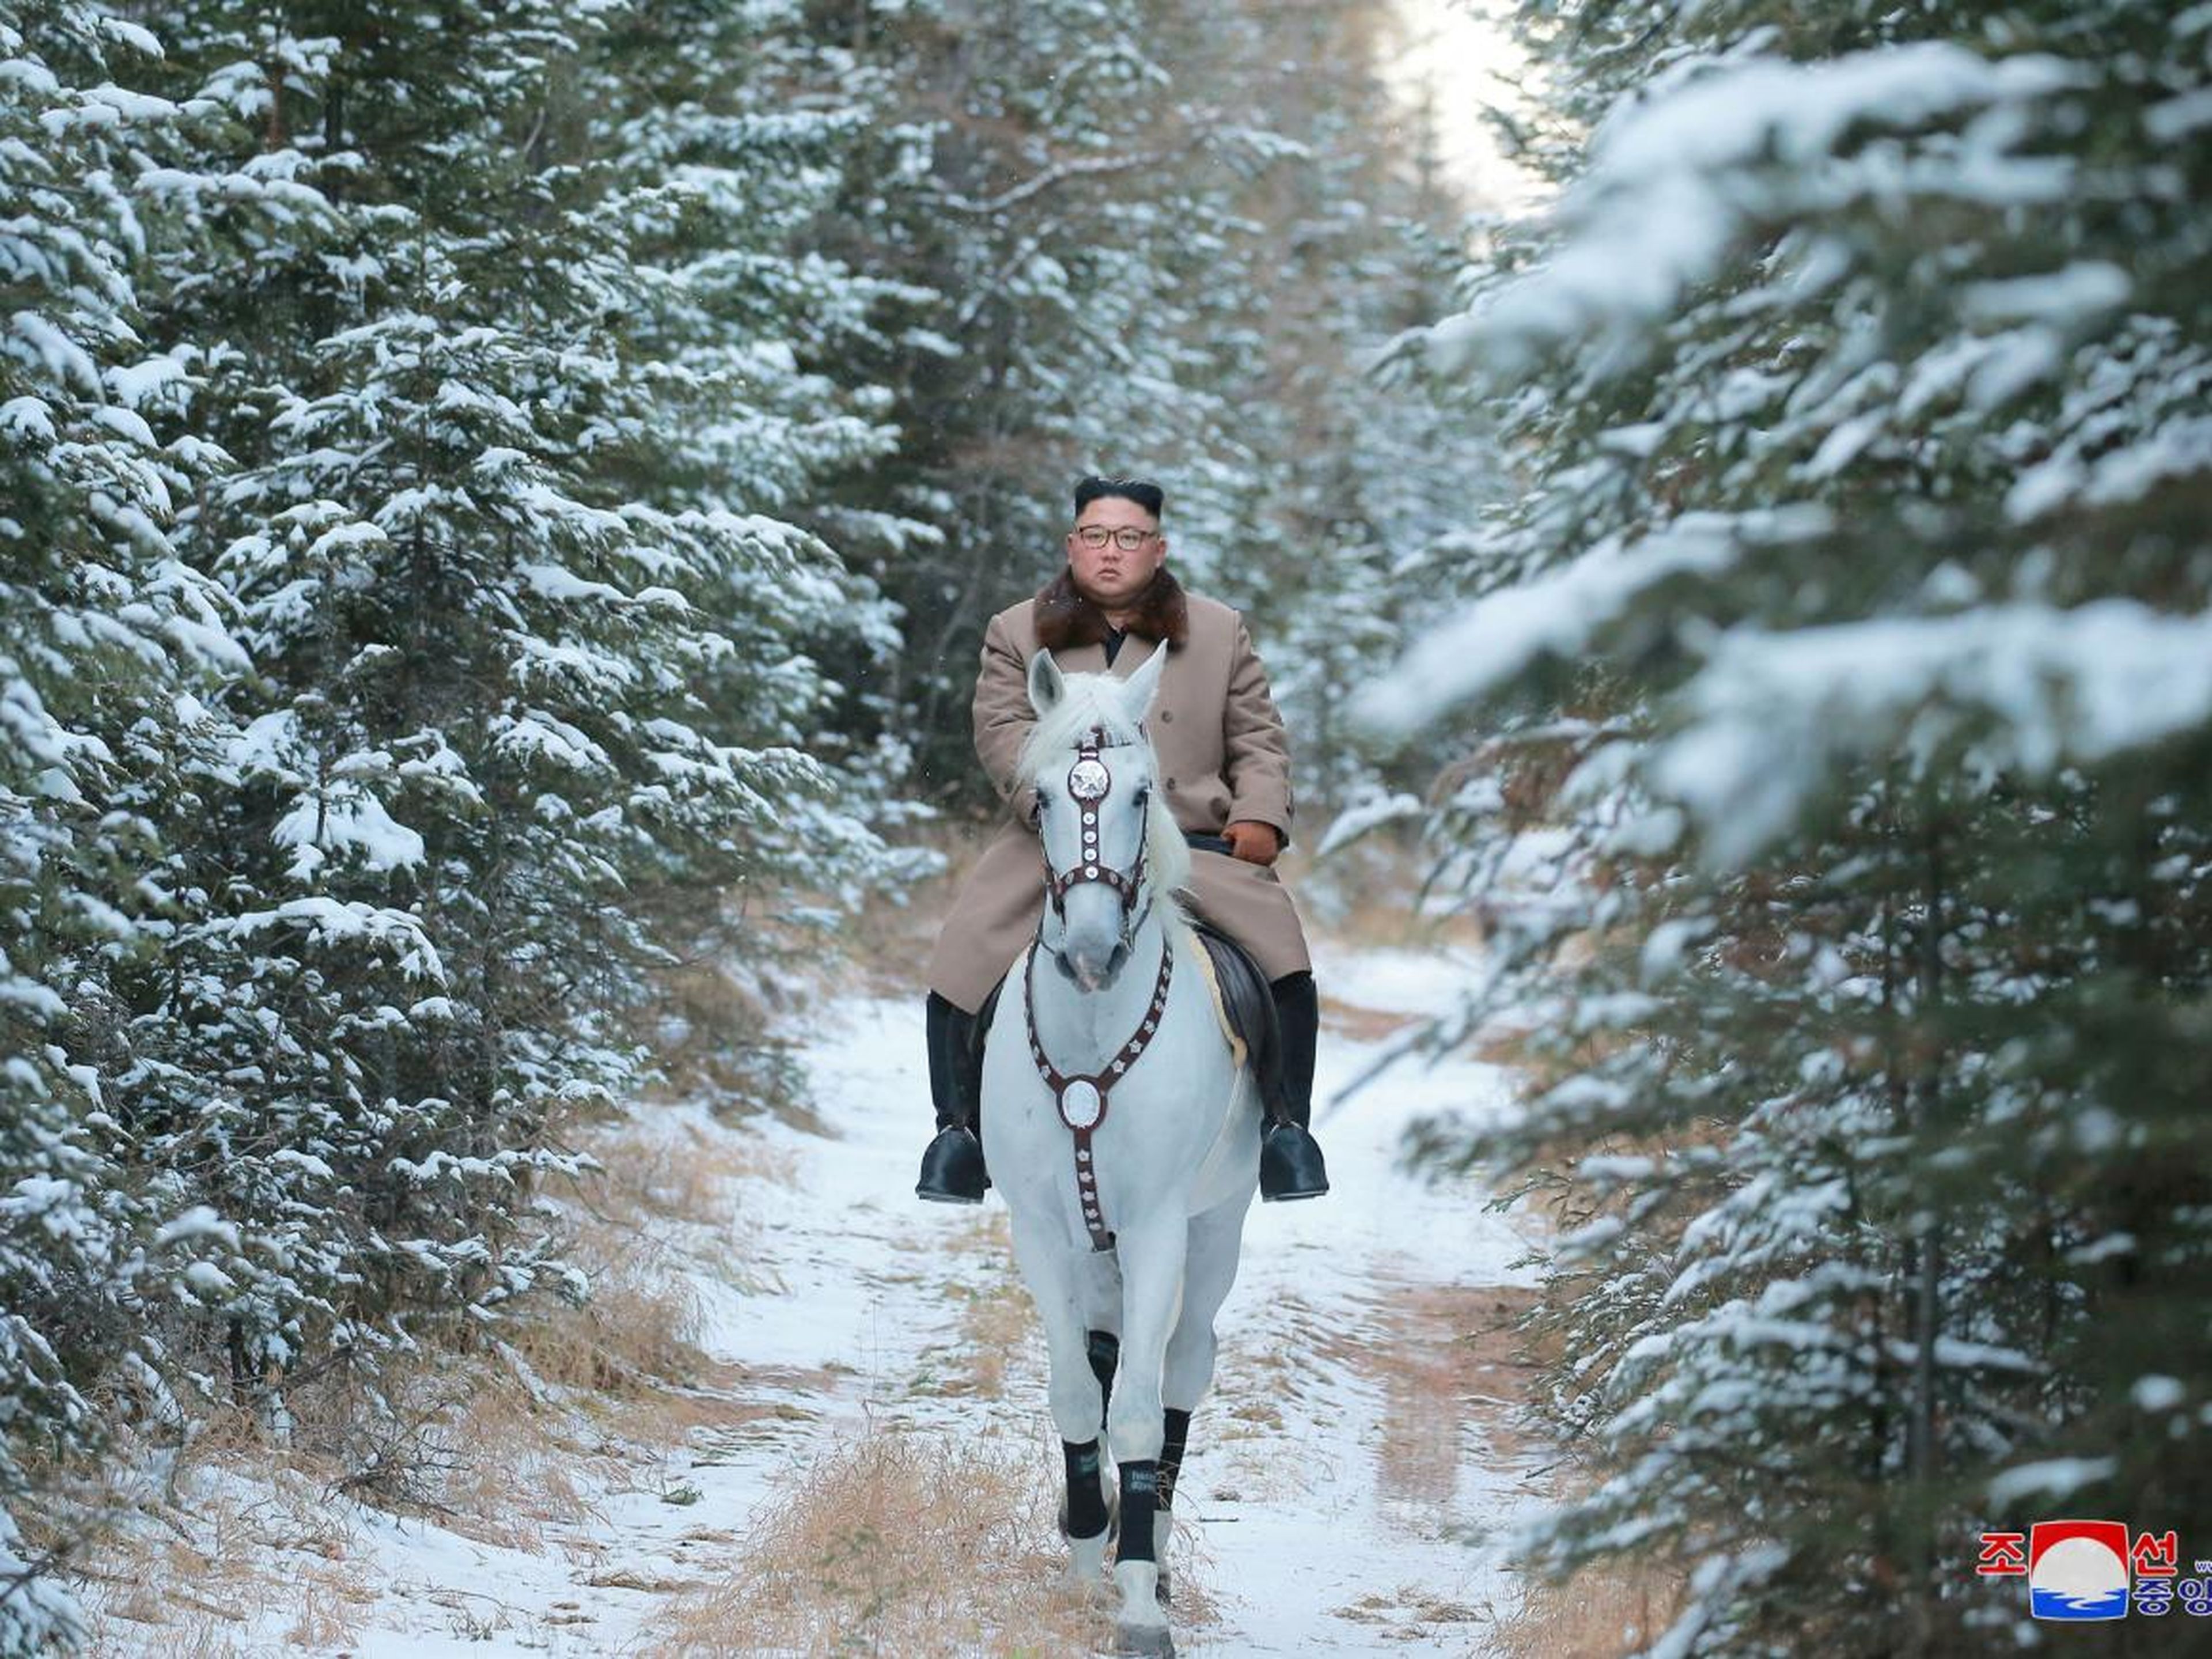 Kim rides an immaculate, snow-white horse to match his surroundings. But it's not just about equine aesthetics.